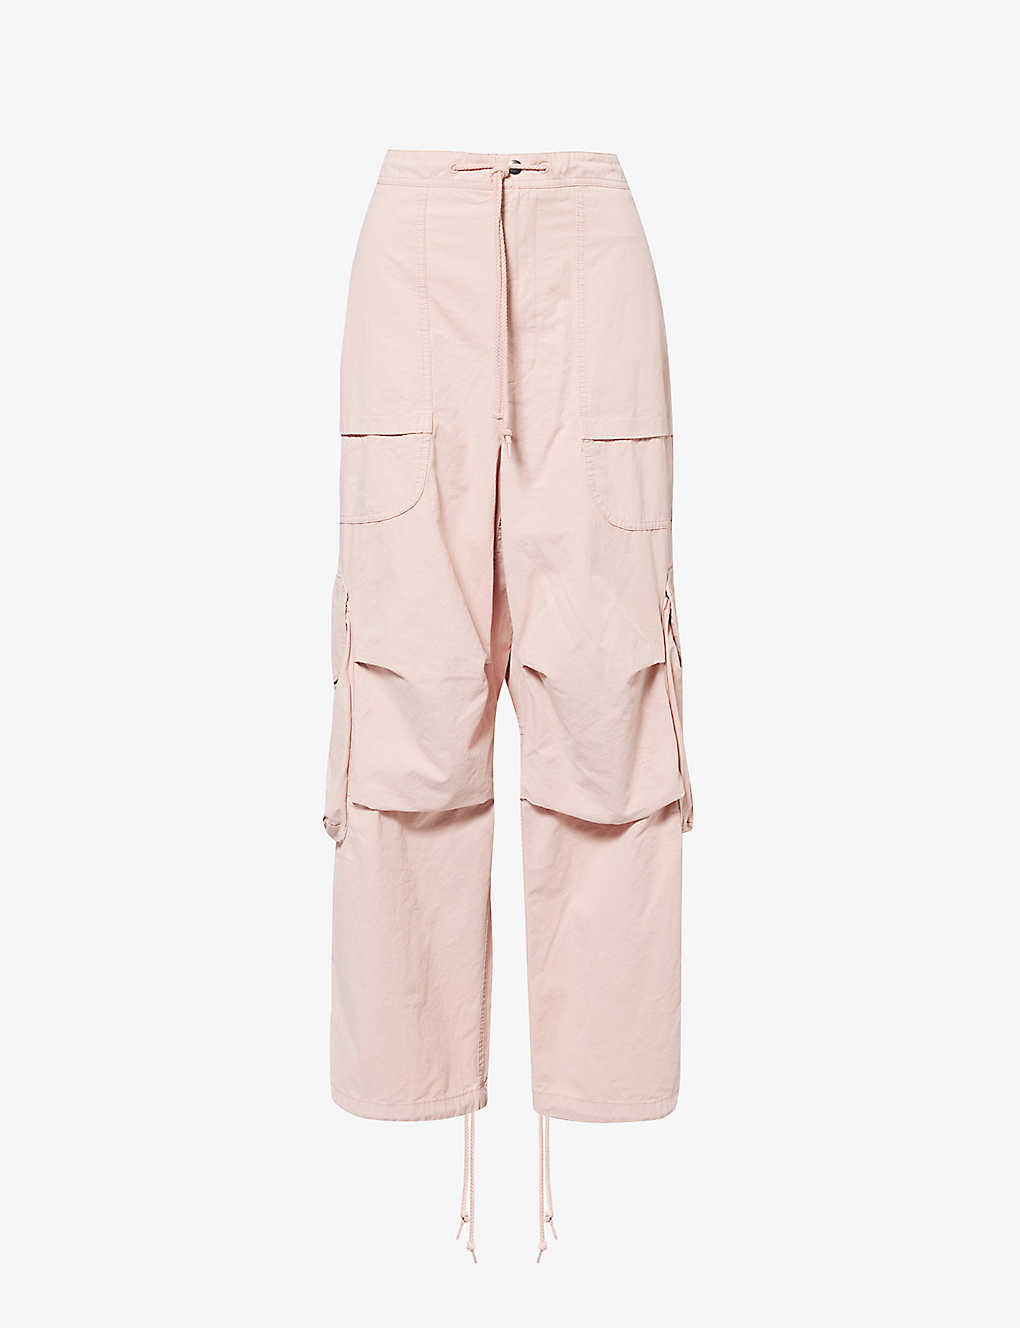 Entire Studios Womens Dusty Pink Freight Cotton Cargo Trousers